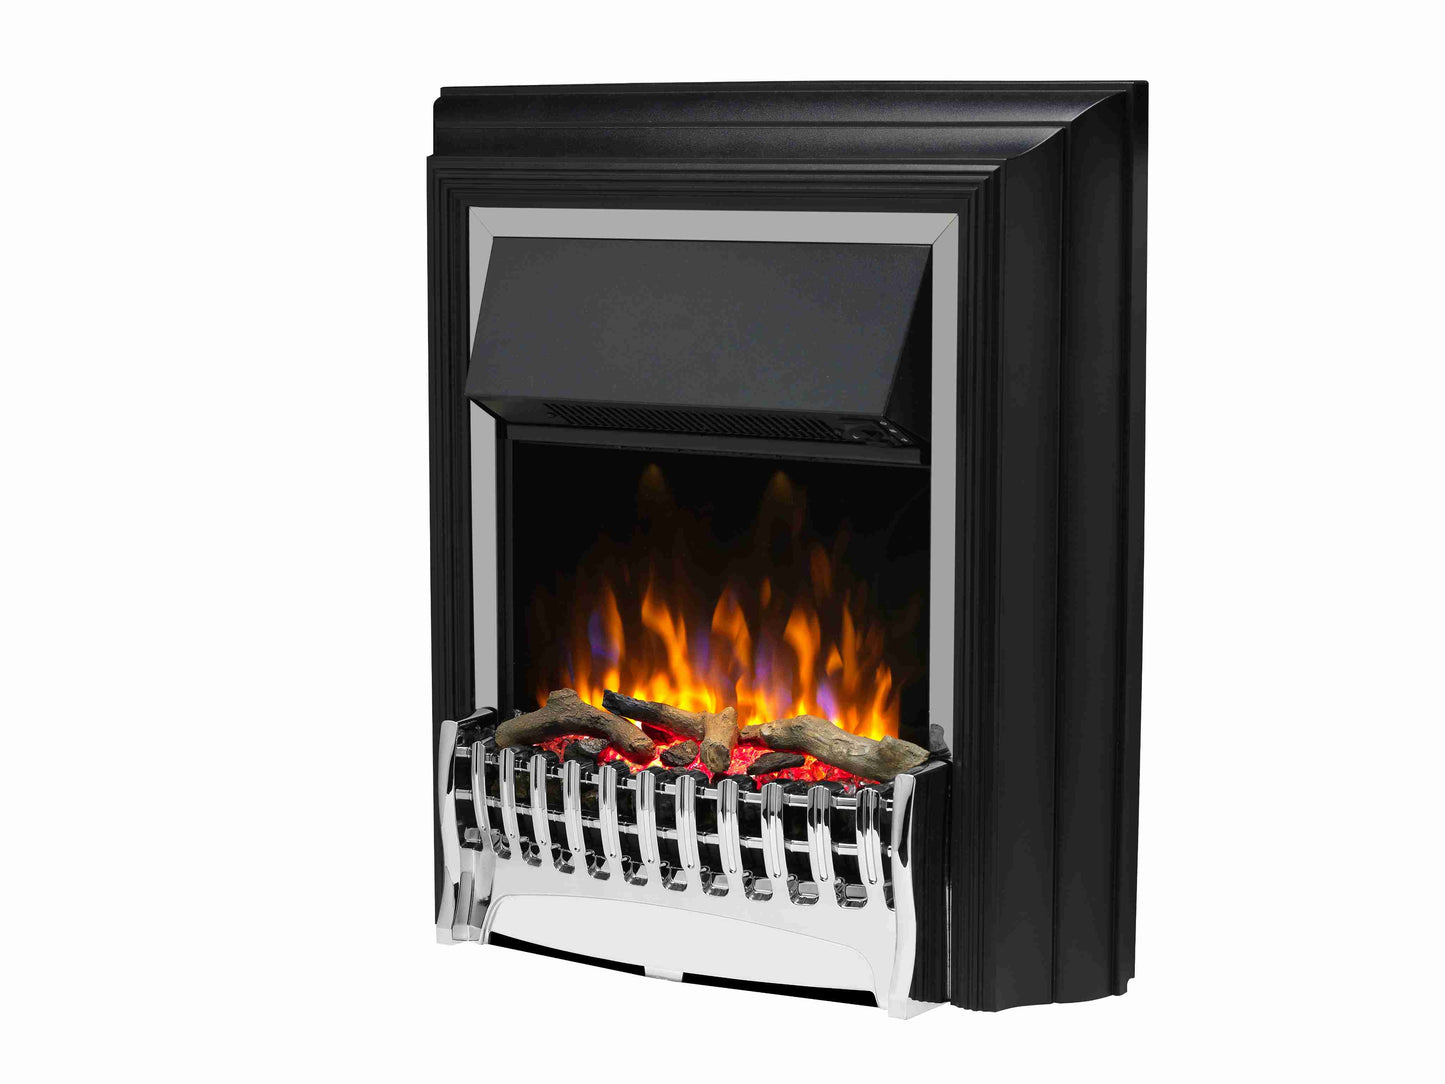 Dimplex Kingsley Deluxe Freestanding Optiflame Electric Fire KING20XCH Chrome